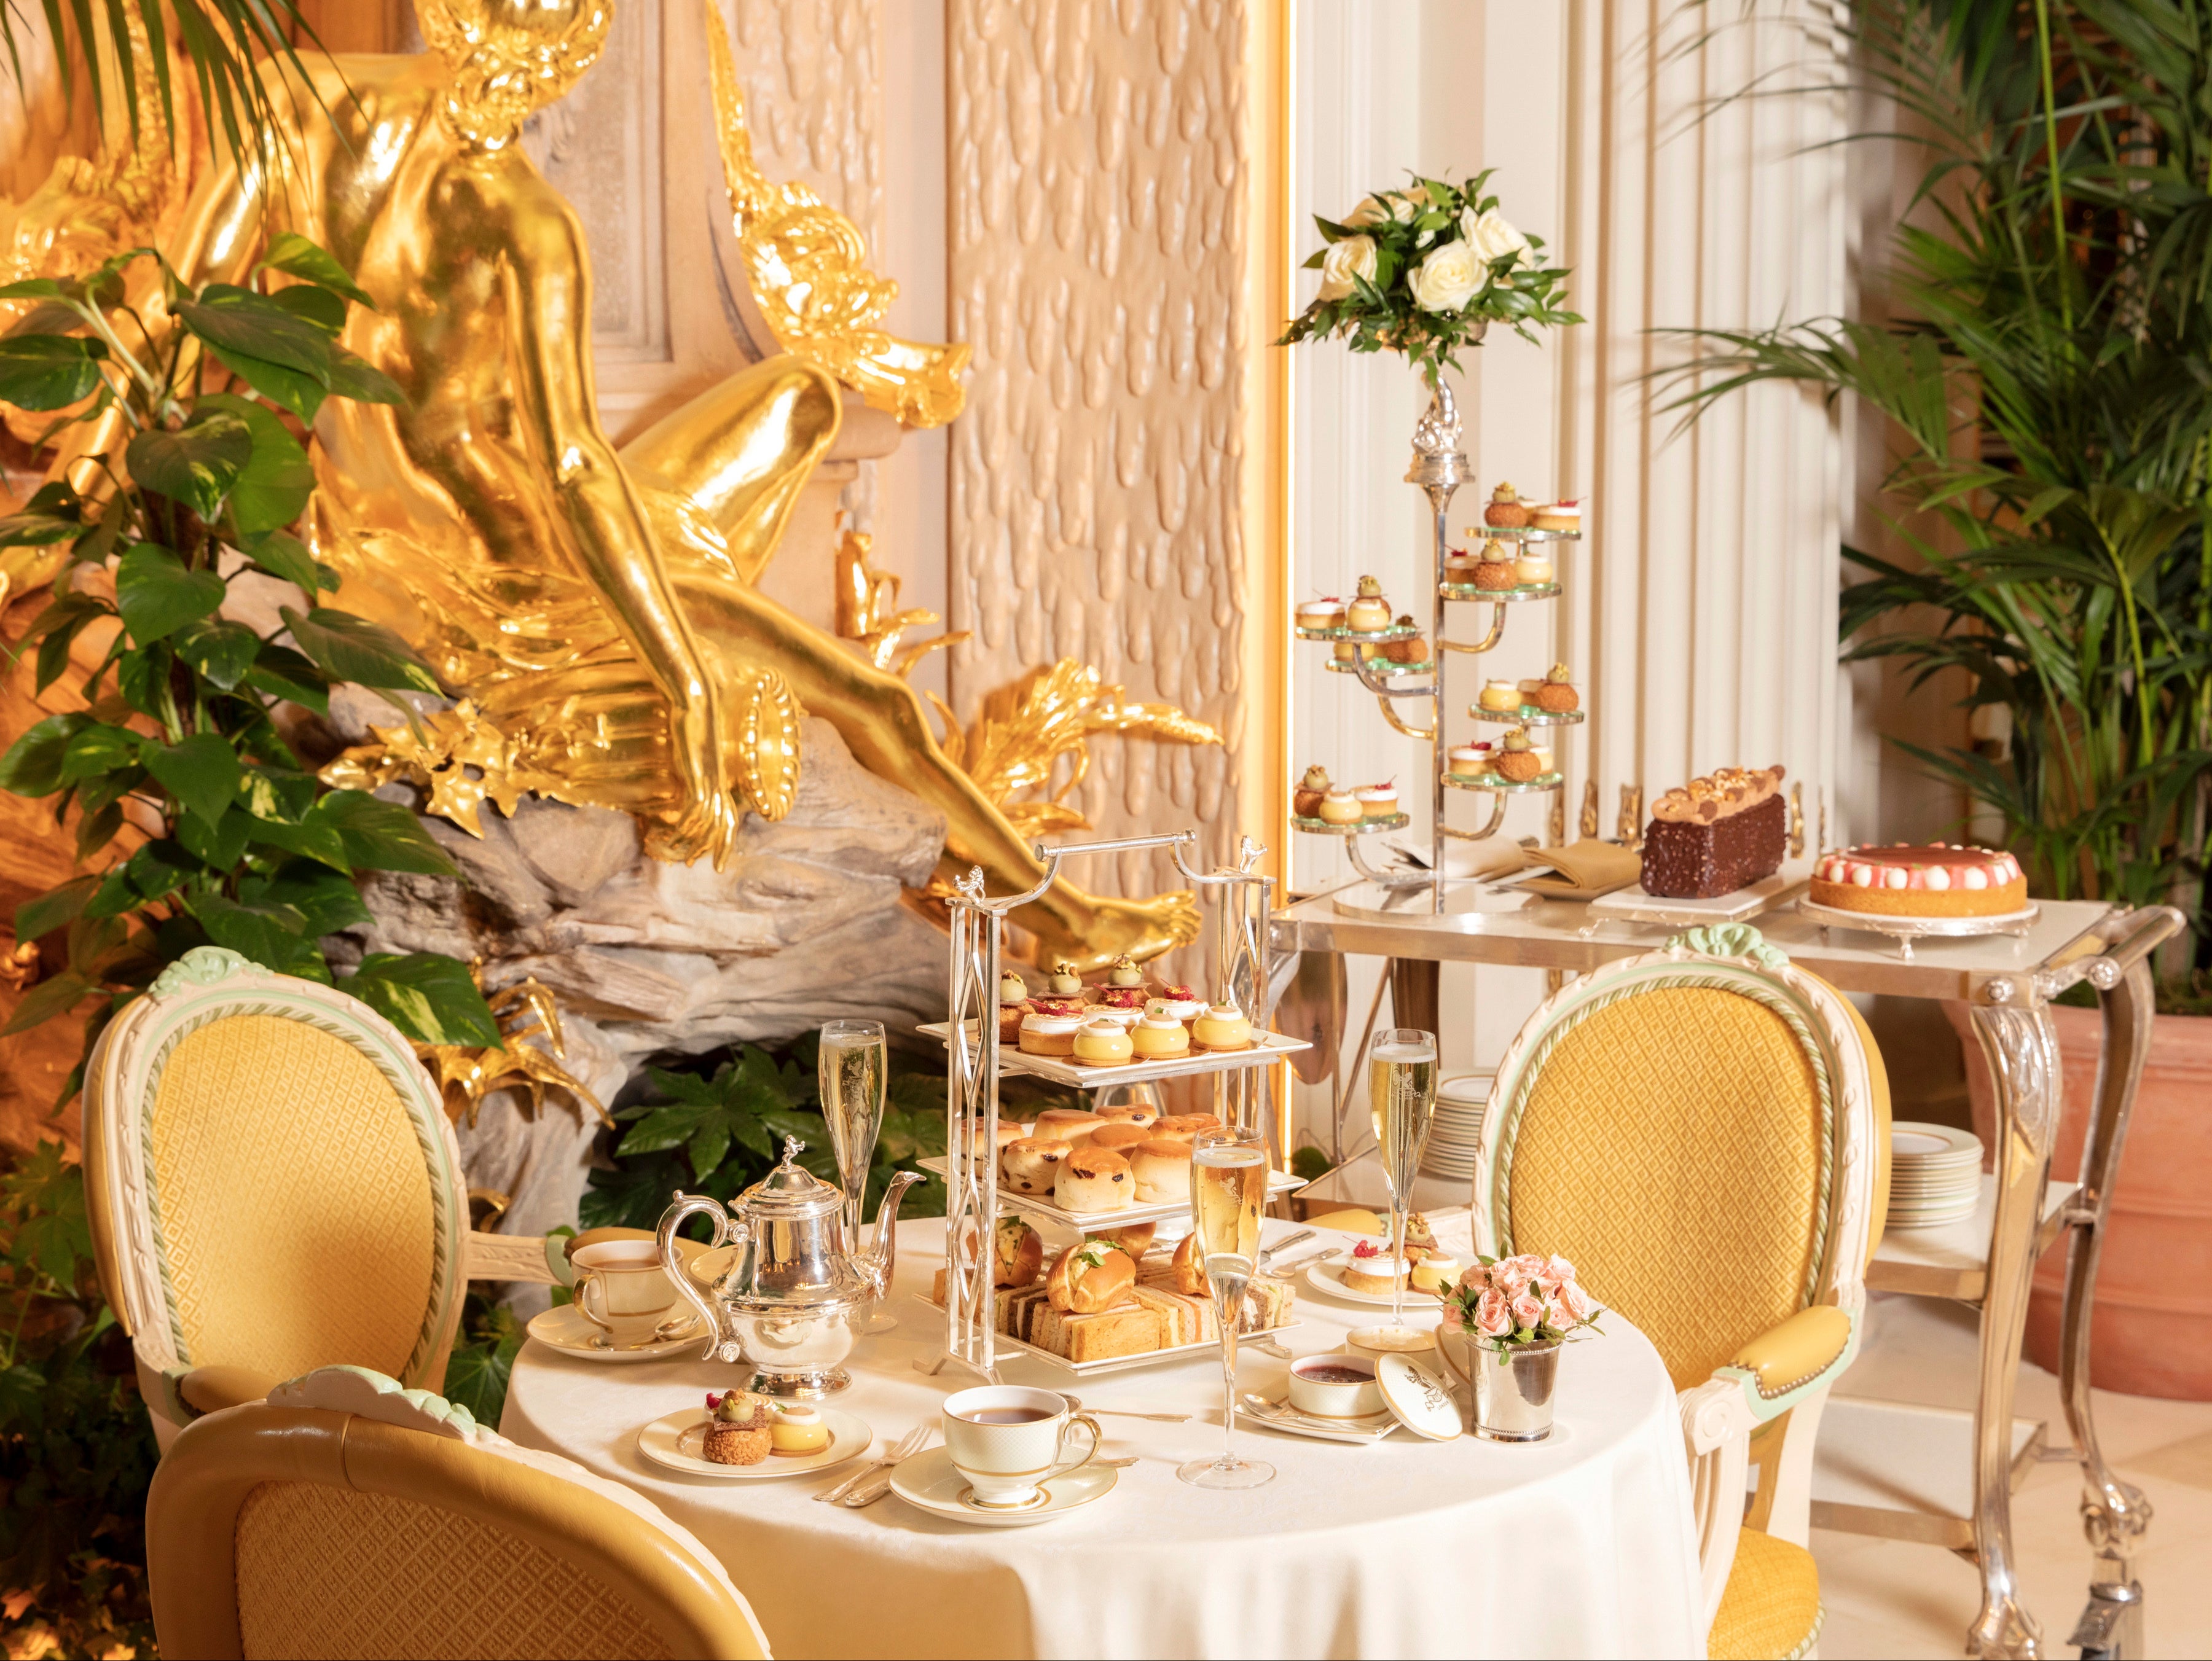 The Ritz, arguably London’s best known afternoon tea destination